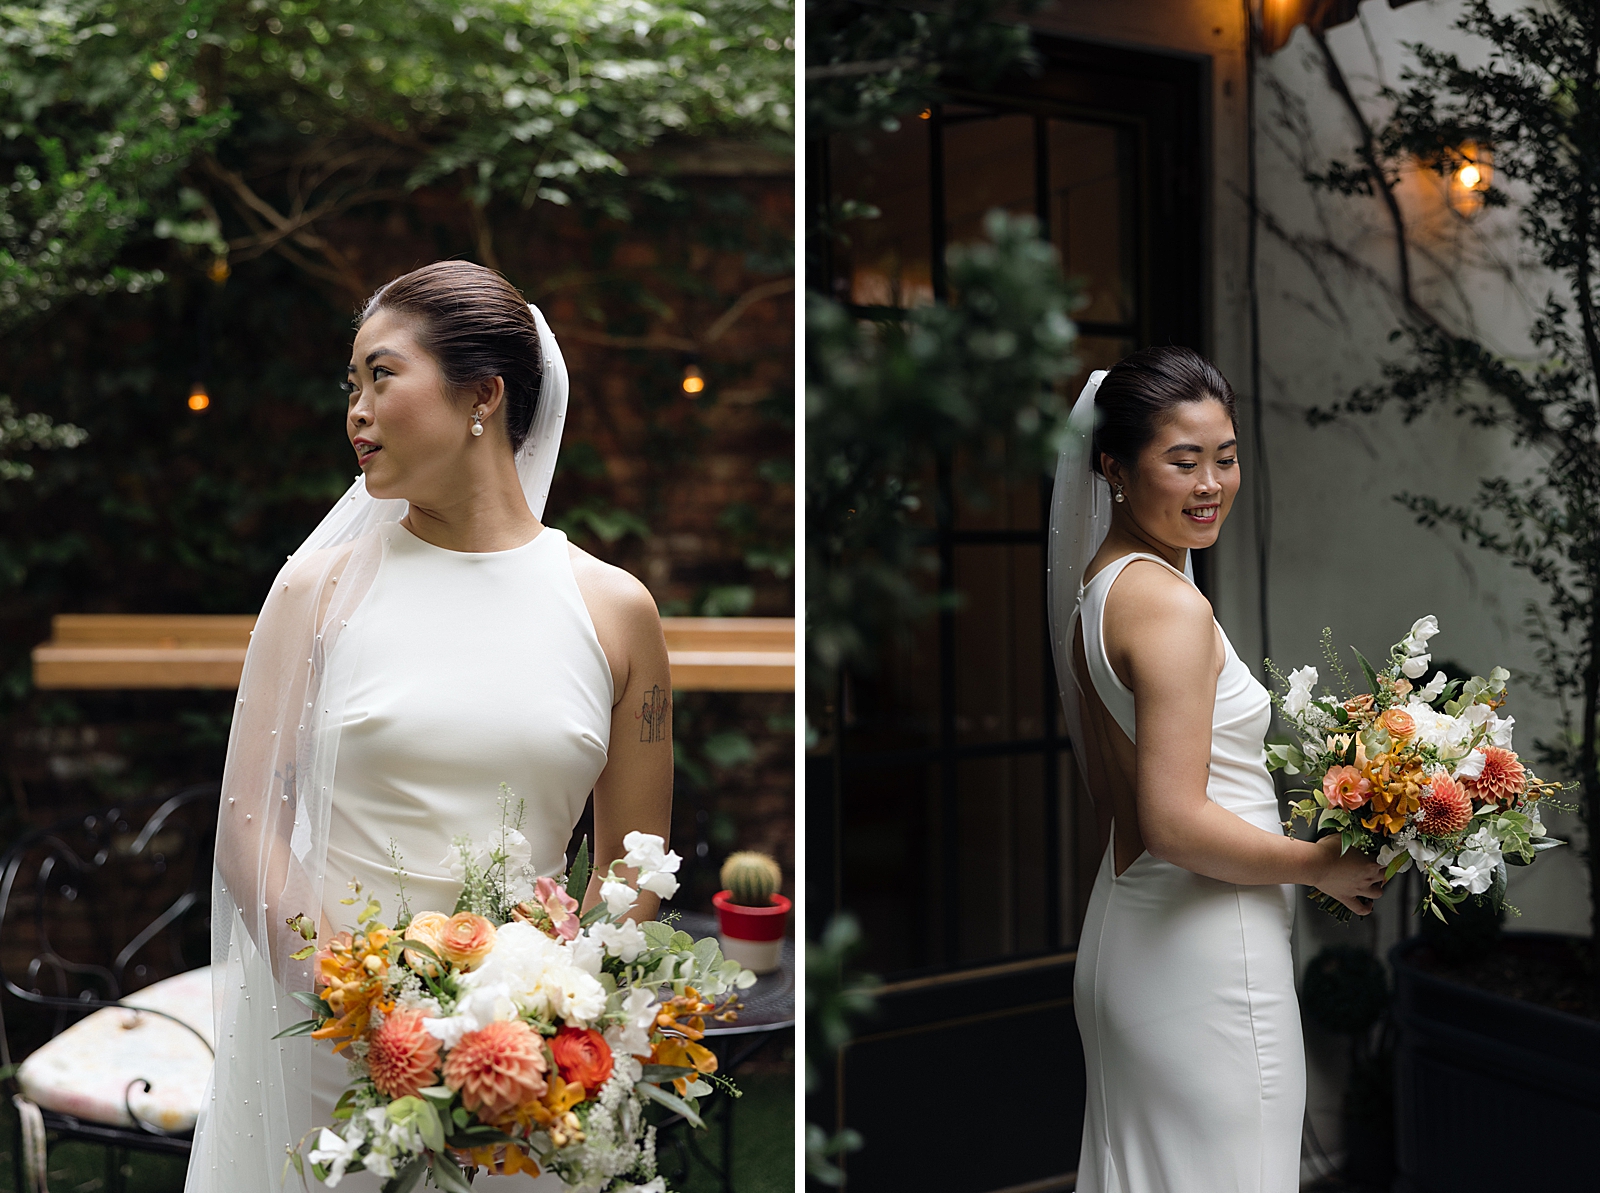 Left photo: Upper body shot of the bride posing with her bouquet.
Right photo: Upper body shot of the bride smiling over her shoulder as she holds her bouquet. 